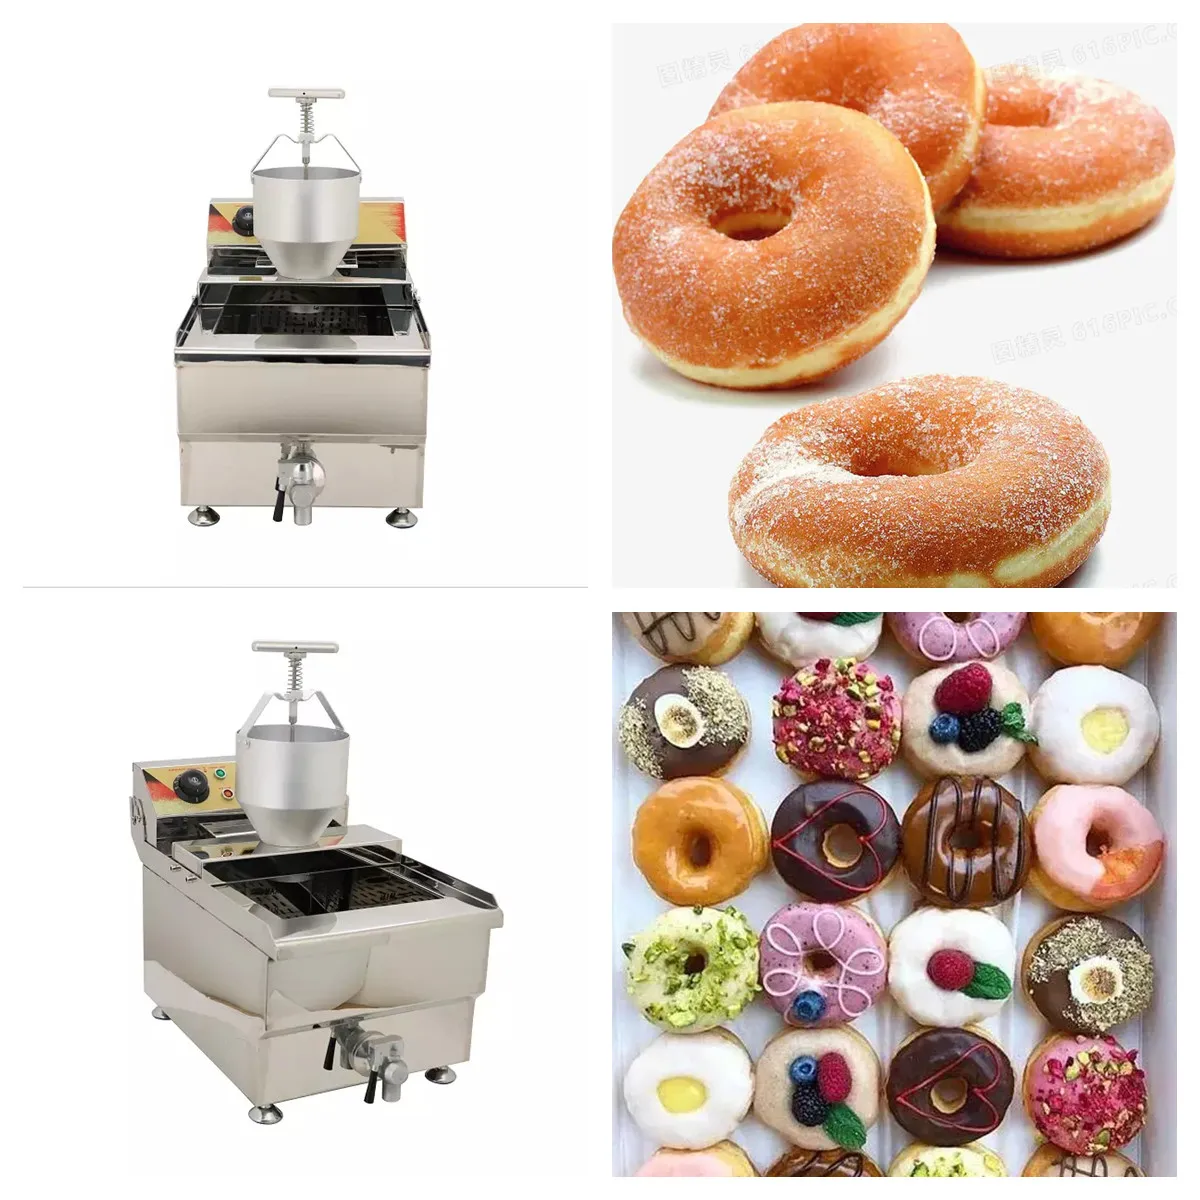 17L Single Cylinder Stainless Steel Electric Deep Fryer With Manual Donut Making Machine Chicken Potato Frying Doughnut Maker